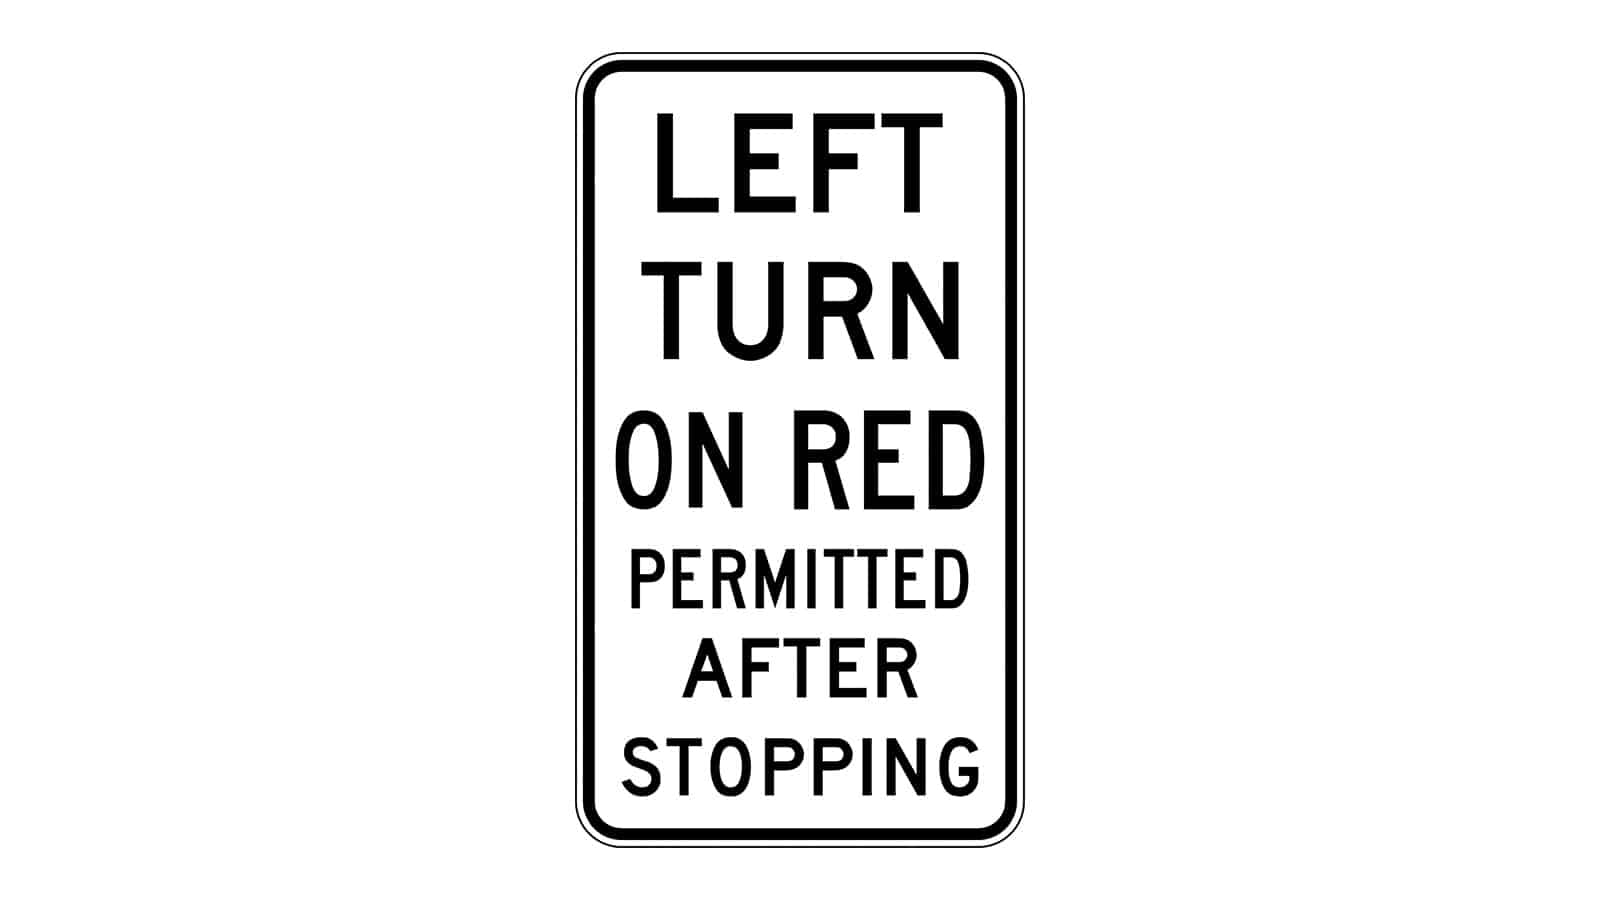 Left Turn on Red Permitted After Stopping Sign